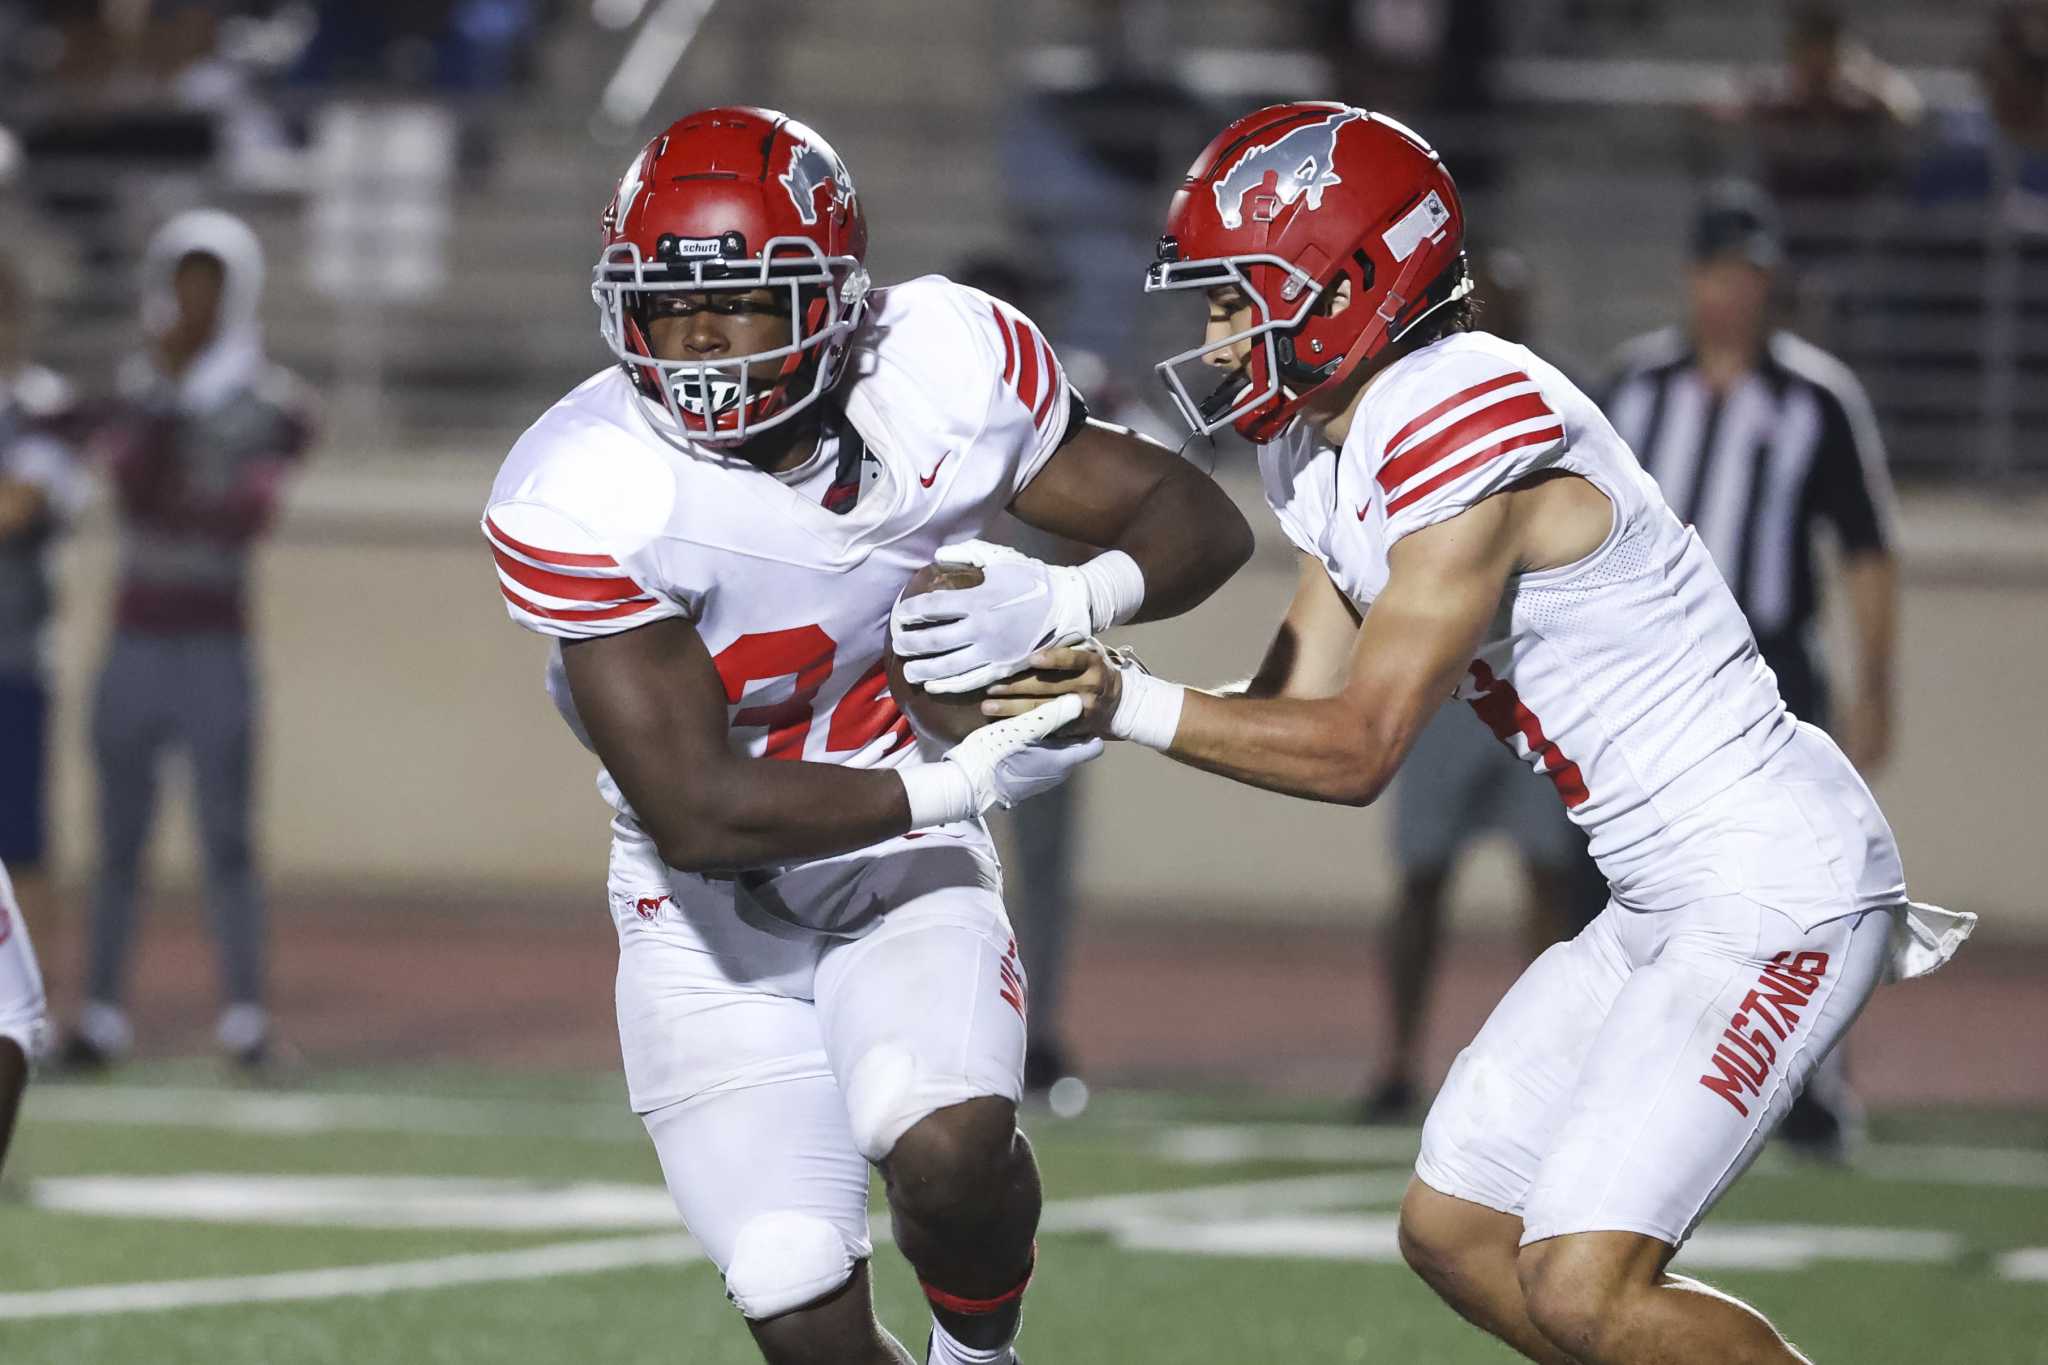 HS FOOTBALL: Cougars rev up running game, hike record to 5-0